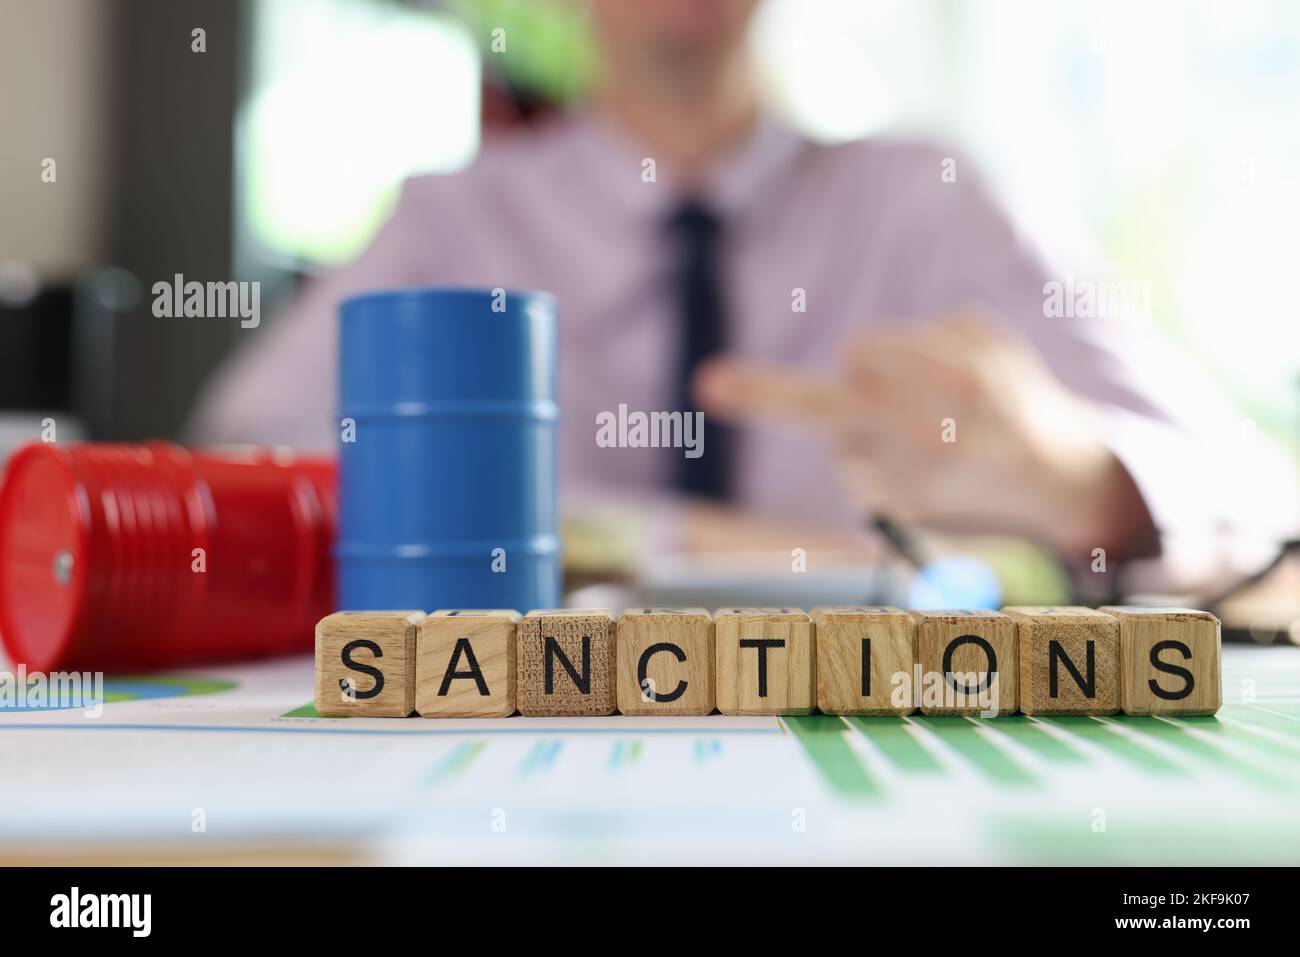 Oil drums on financial statements, word sanction and business man in background. Stock Photo